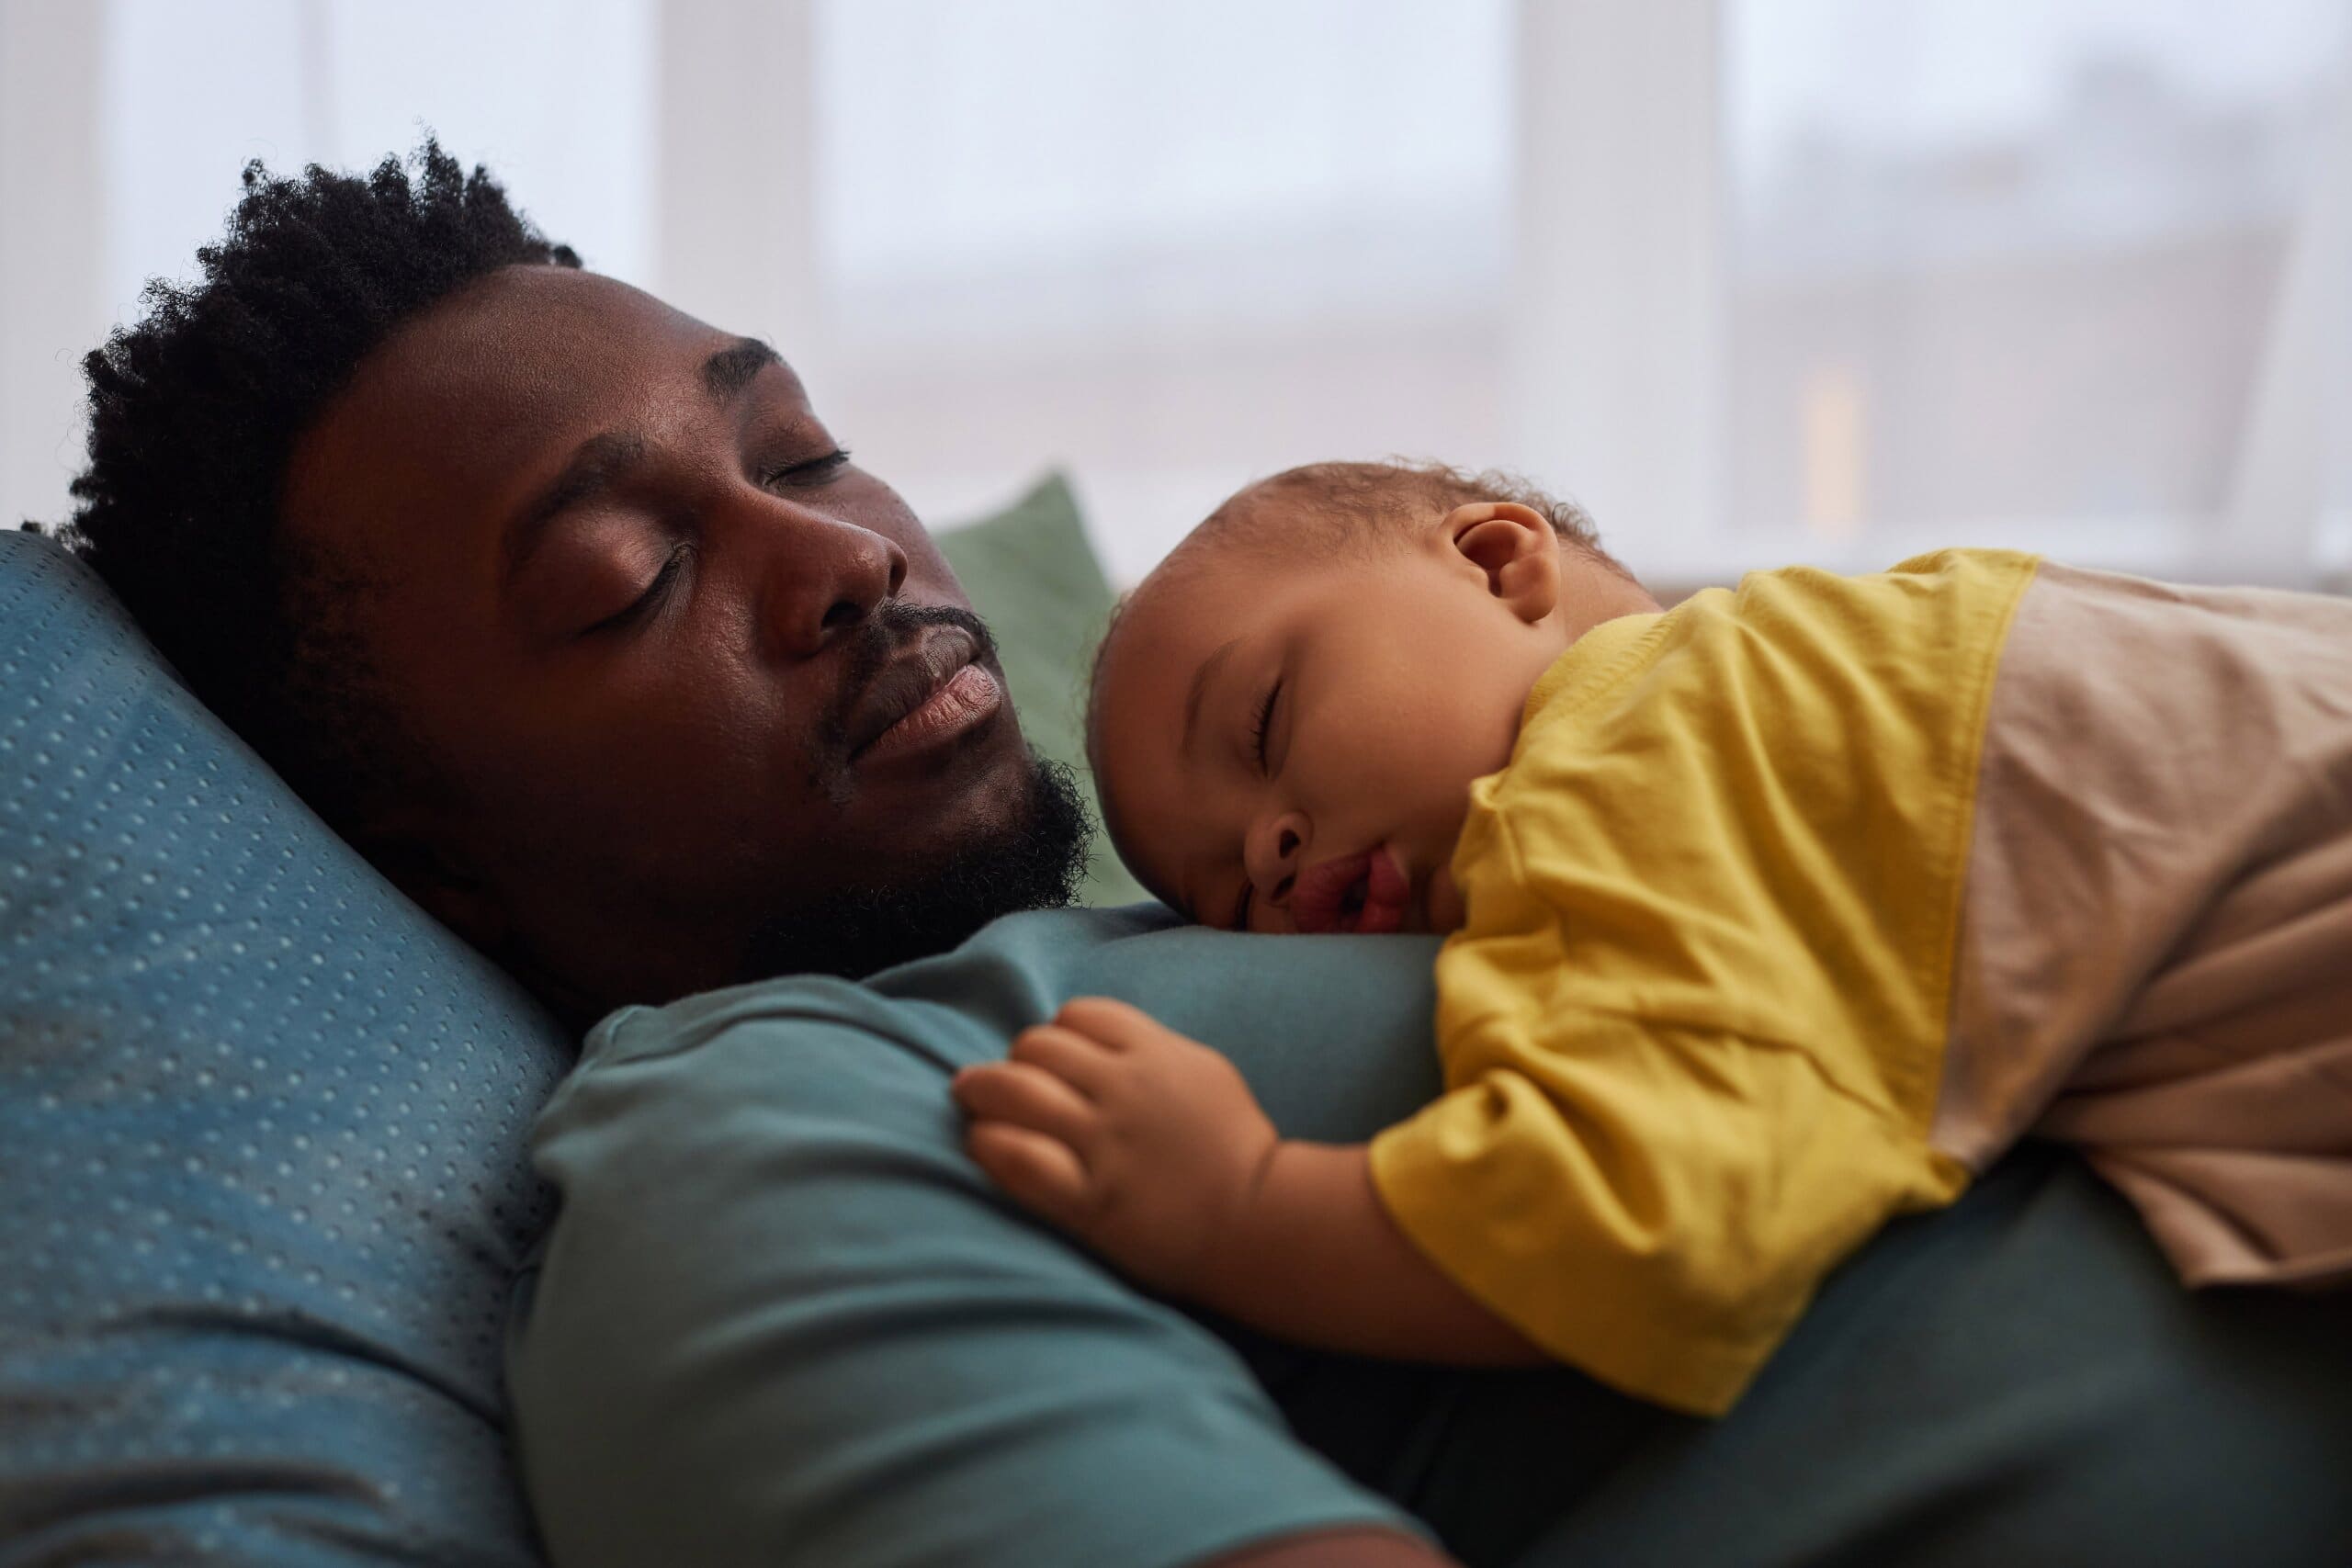 Side view of man asleep with a young child sleeping on his chest.